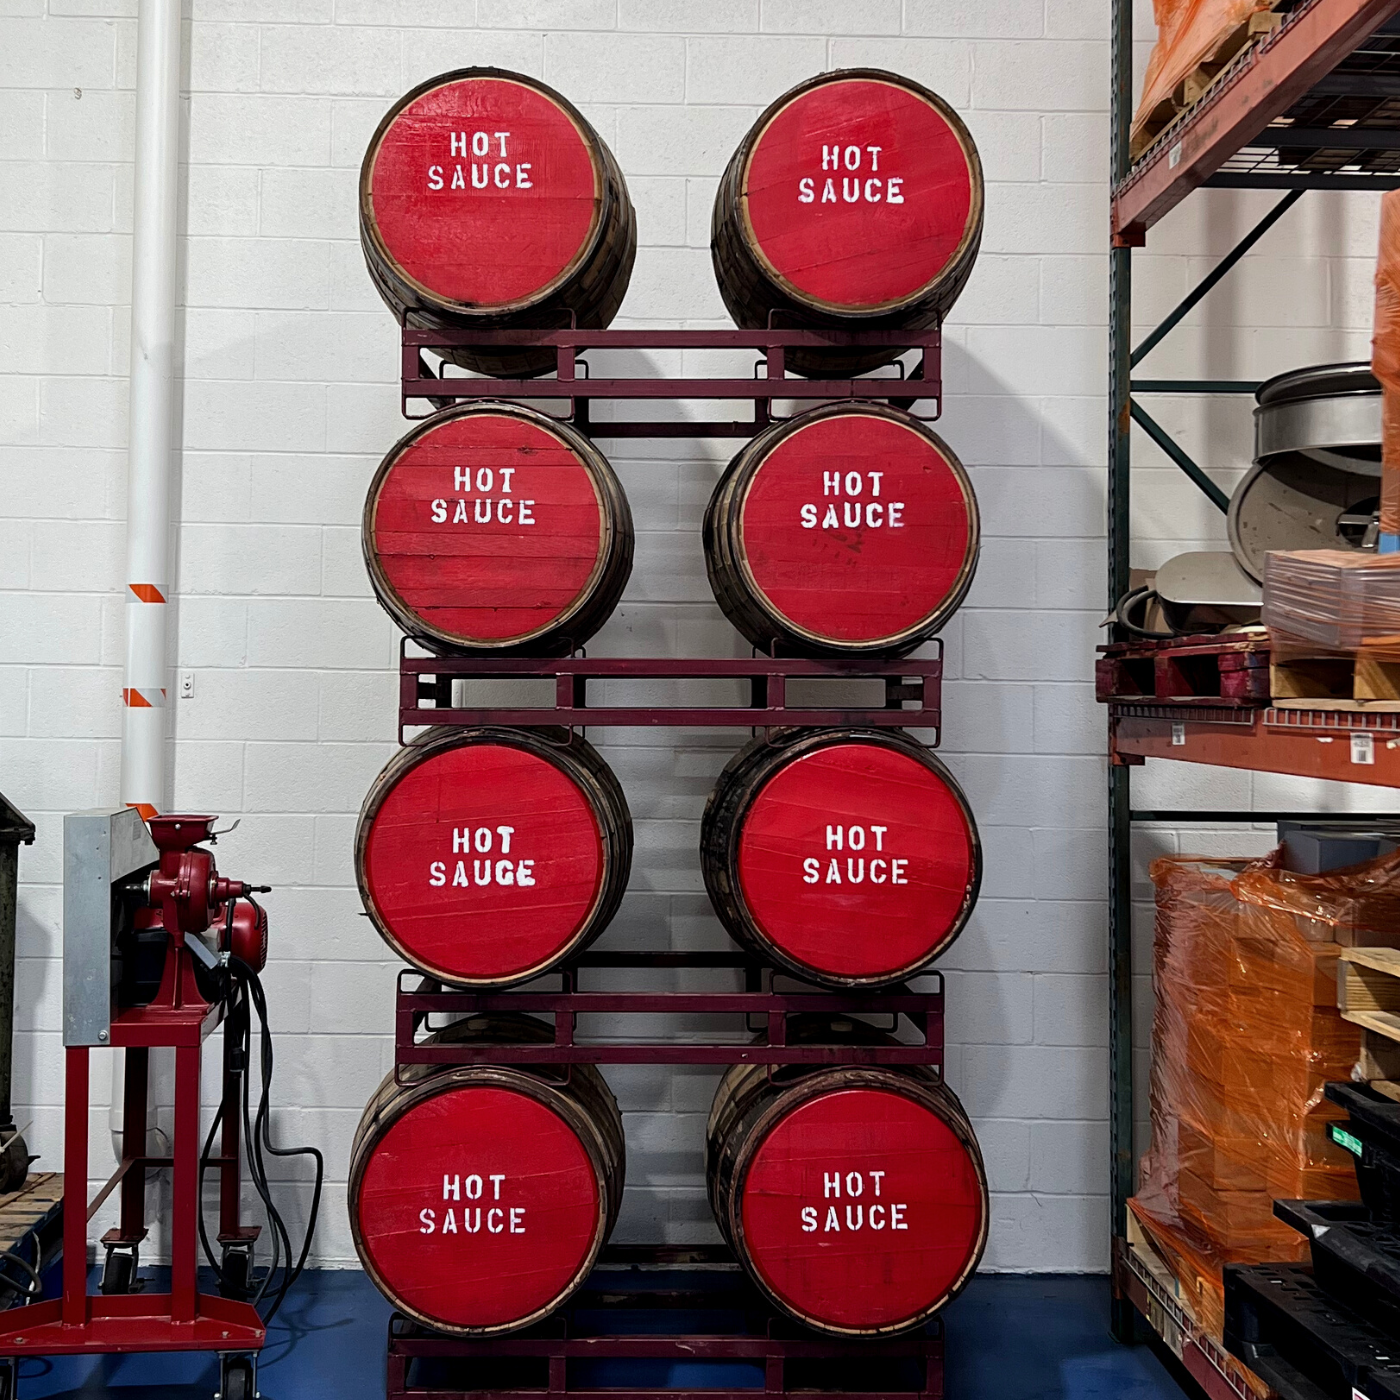 bourbon barrels stacked in a rack with red lids painted in white with "hit sauce".